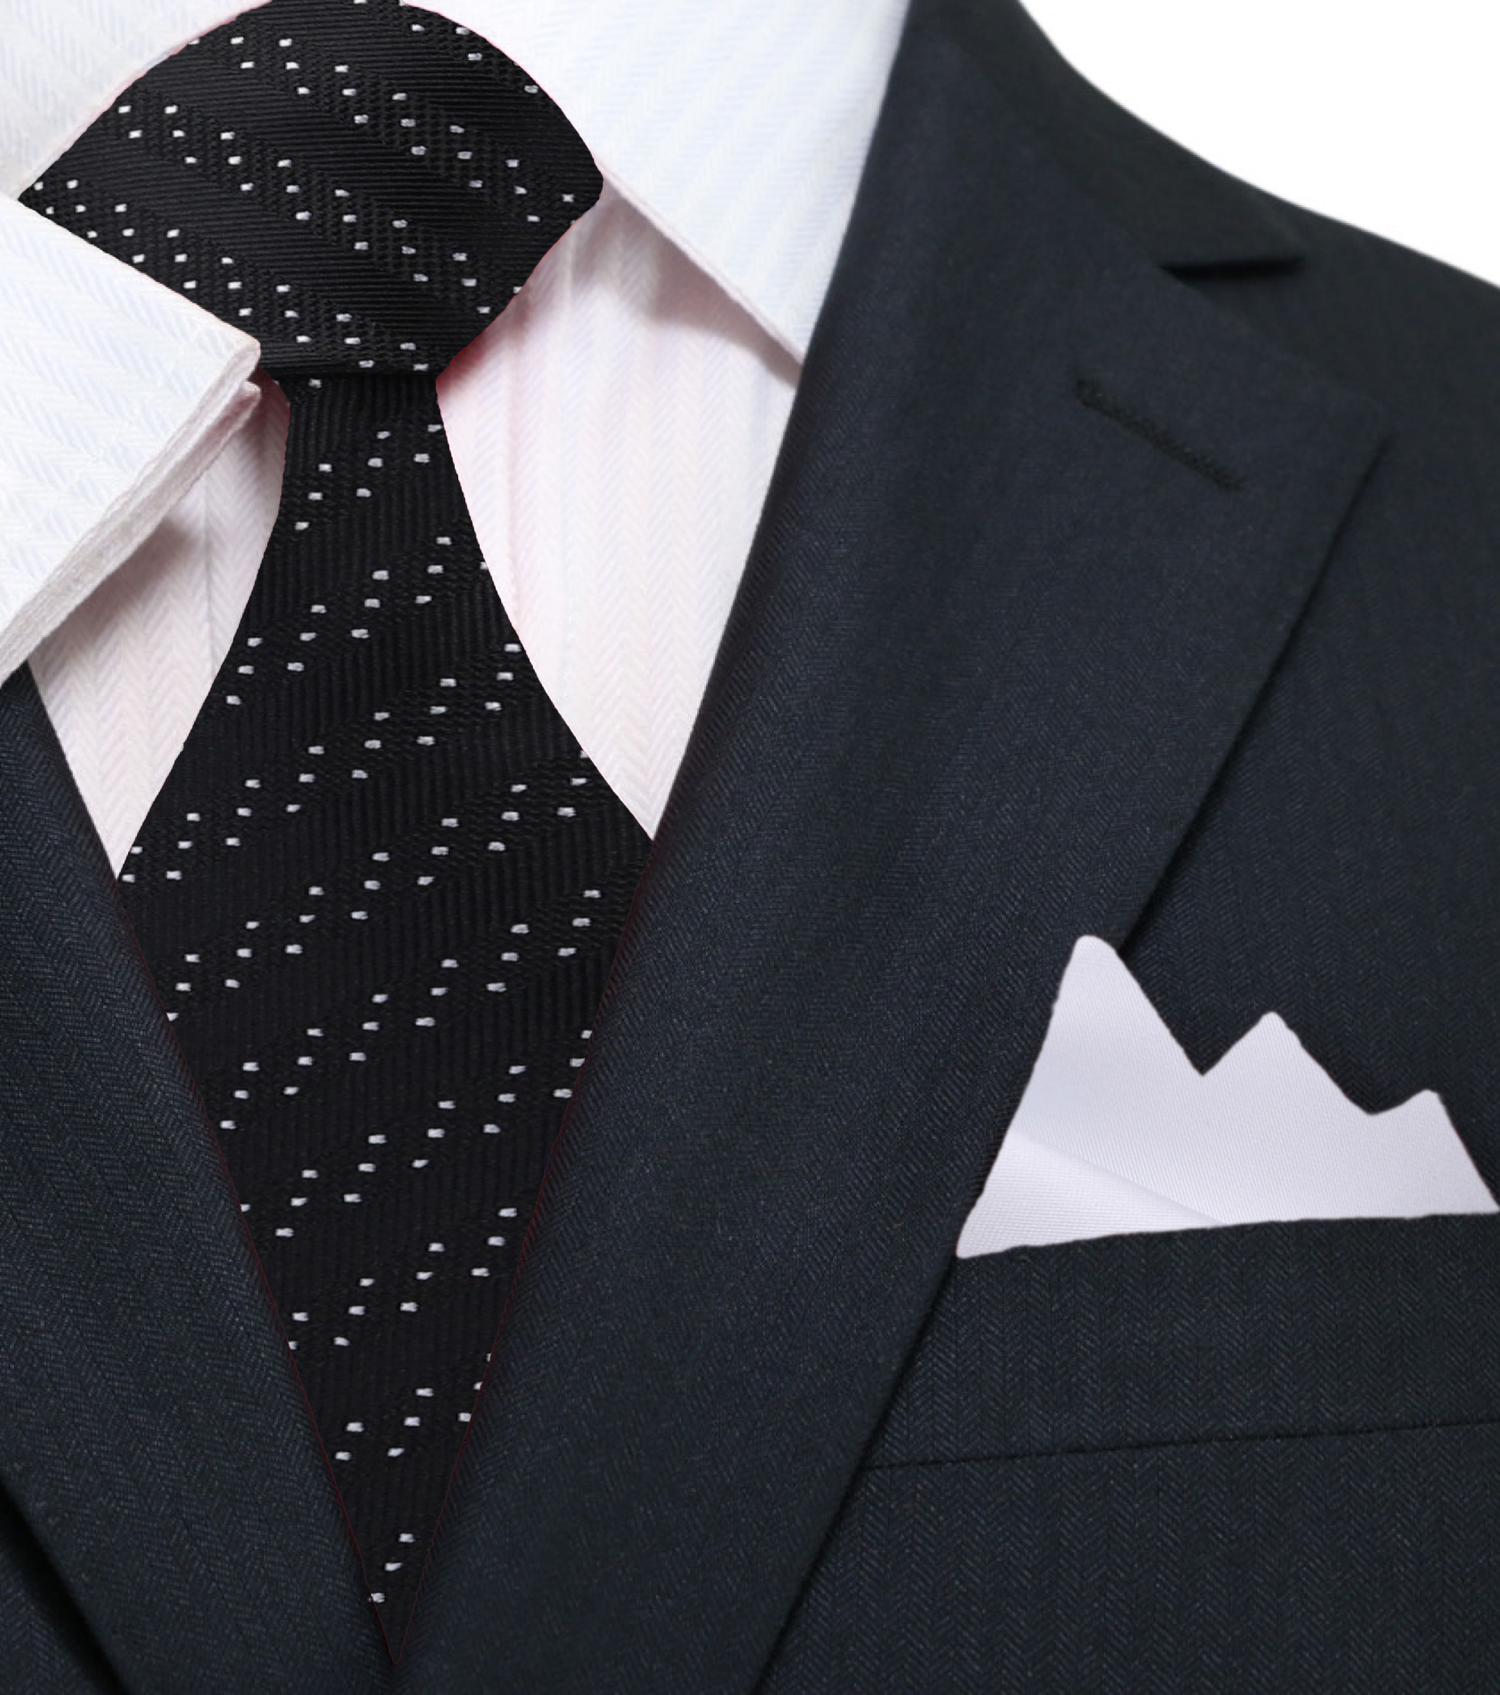 Black with White Dot Necktie and White Square